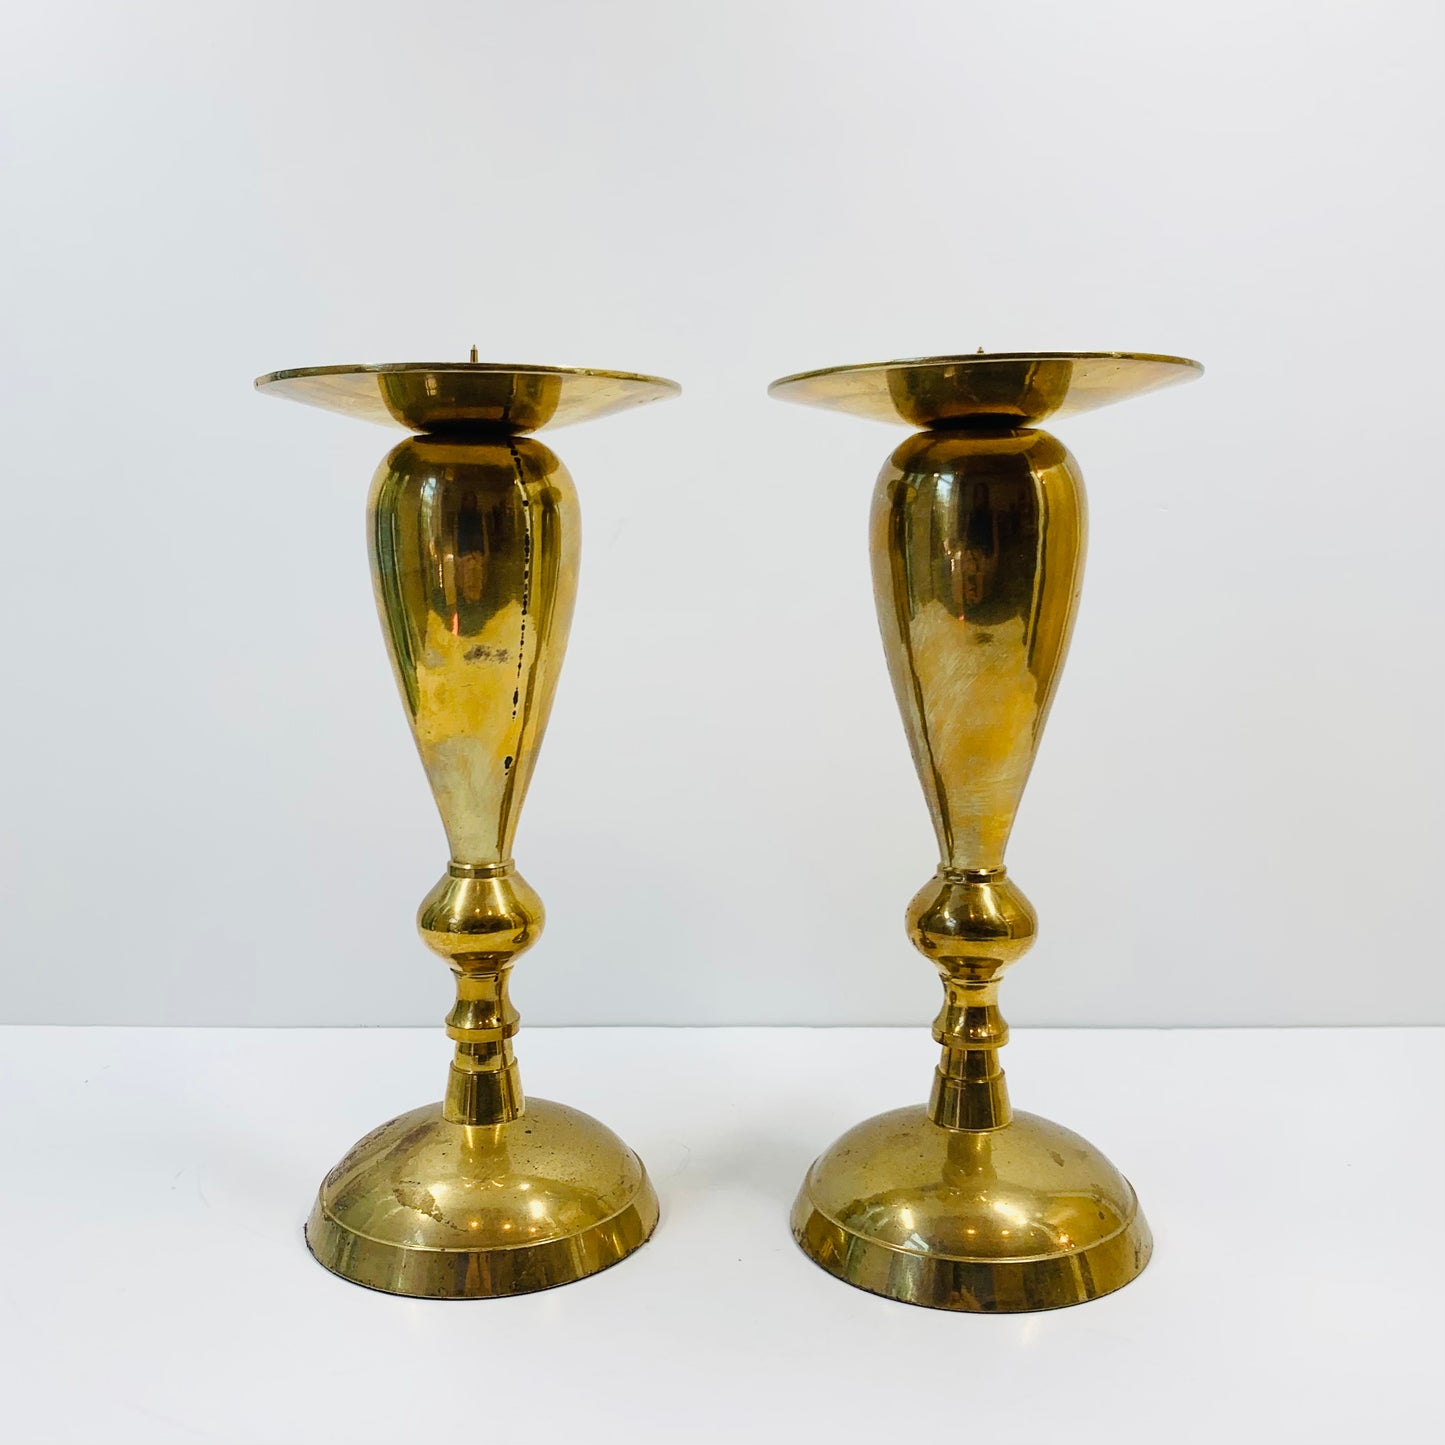 Antique brass candle holder